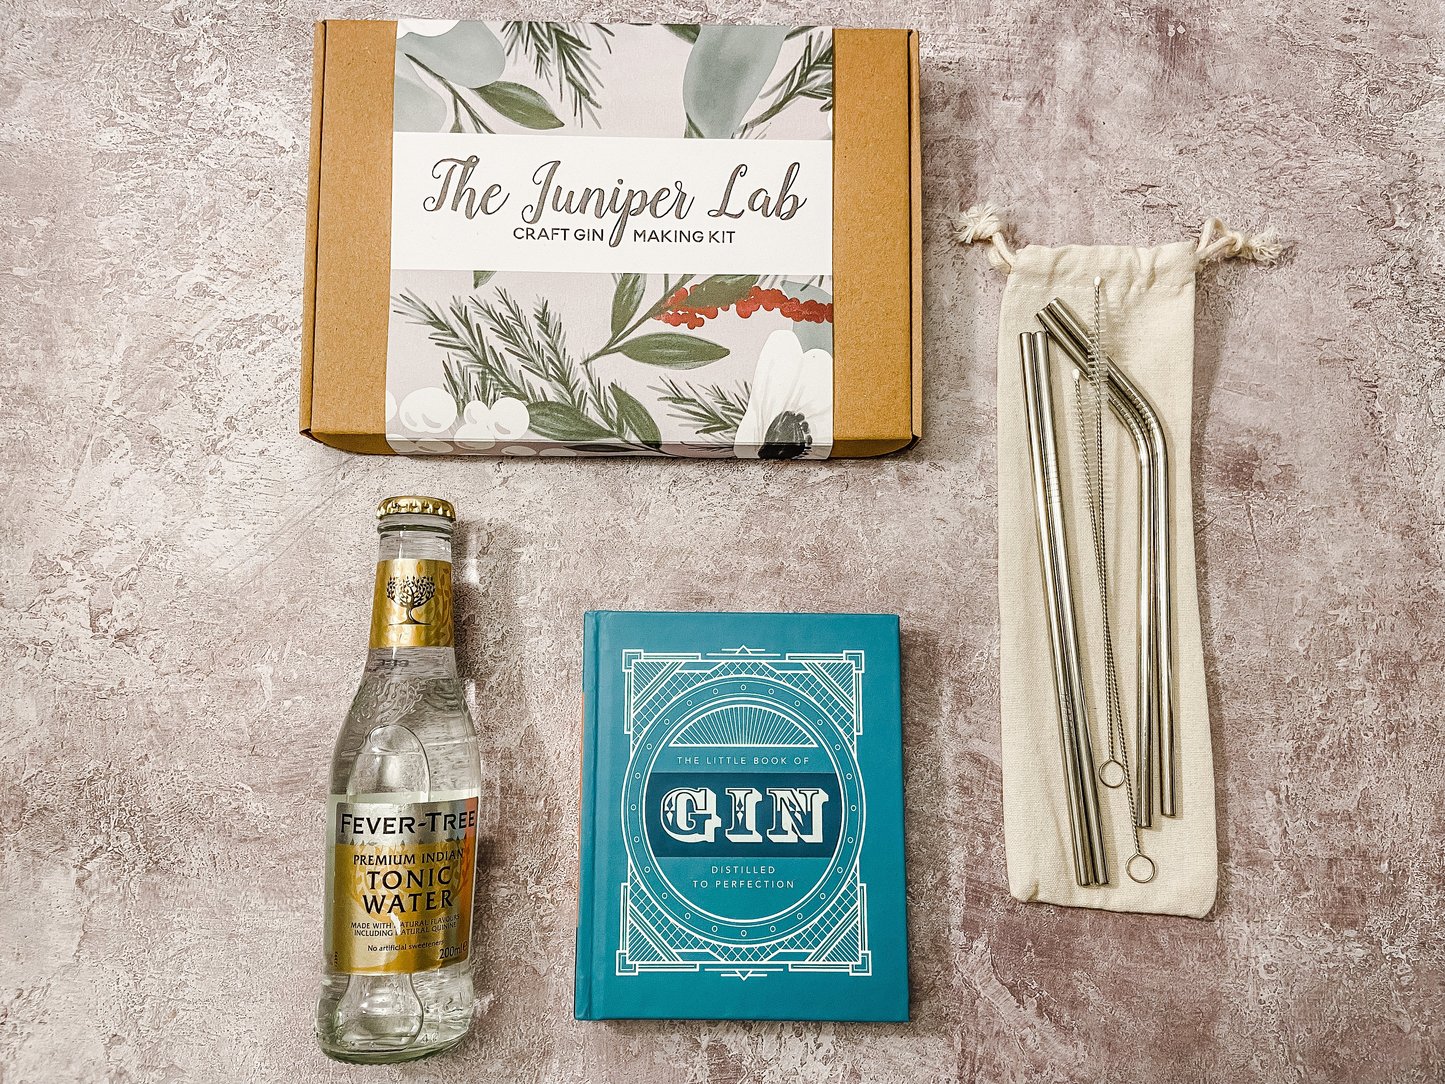 bar@drinkstuff Home Gin Making Kit Gift Boxed Gin Makers Kit with Juniper Berries to Make Your Own Gin